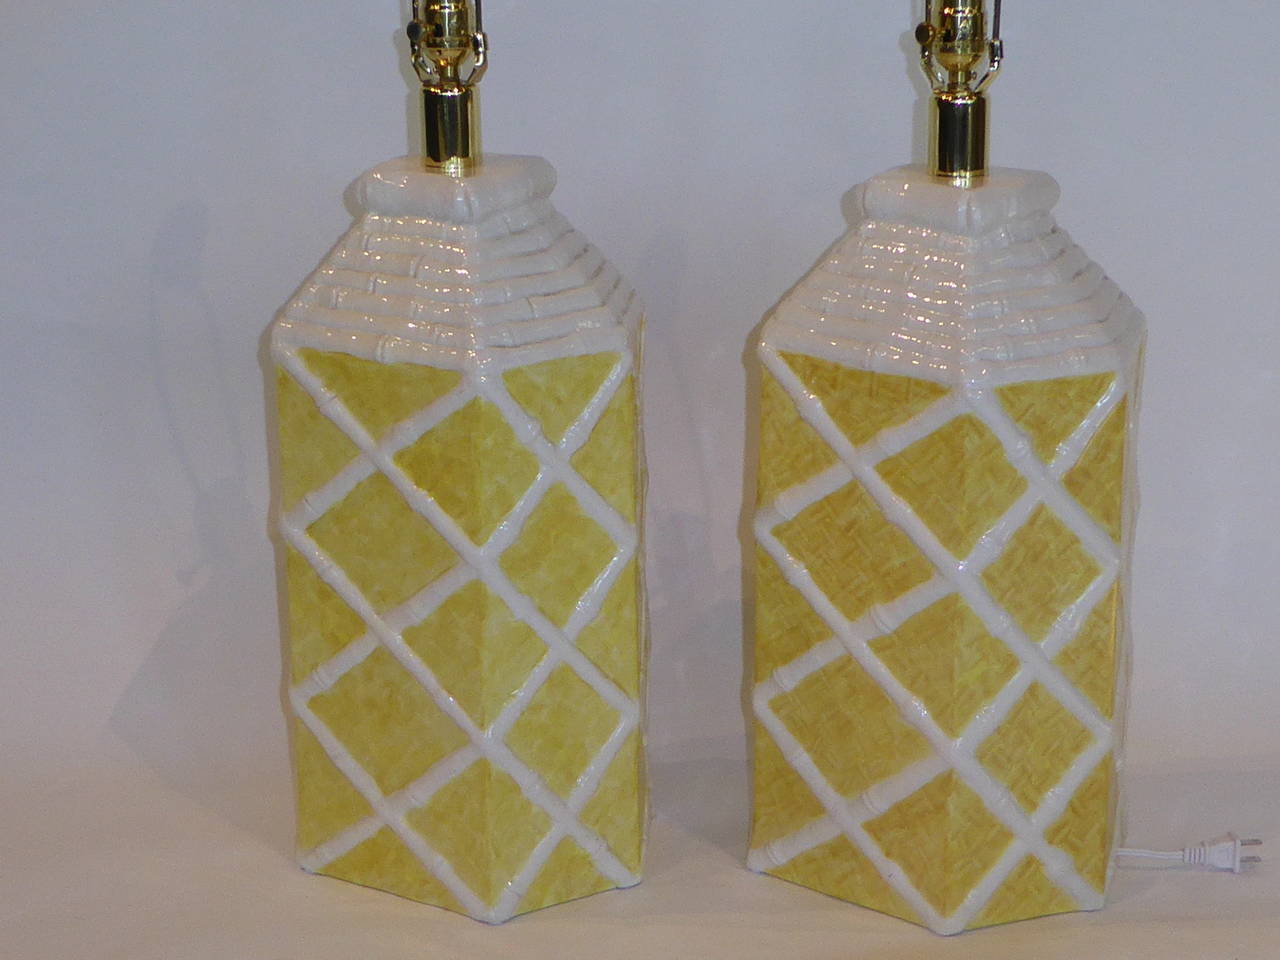 Sunny 1960s Billy Baldwin and Palm Beach style ala a touch of chinoiserie with this pair of signed ceramic table lamps. Elongated hexagonal in shape they have a painted cane background criss-crossed with raised bamboo lattice. Signed Townsends for